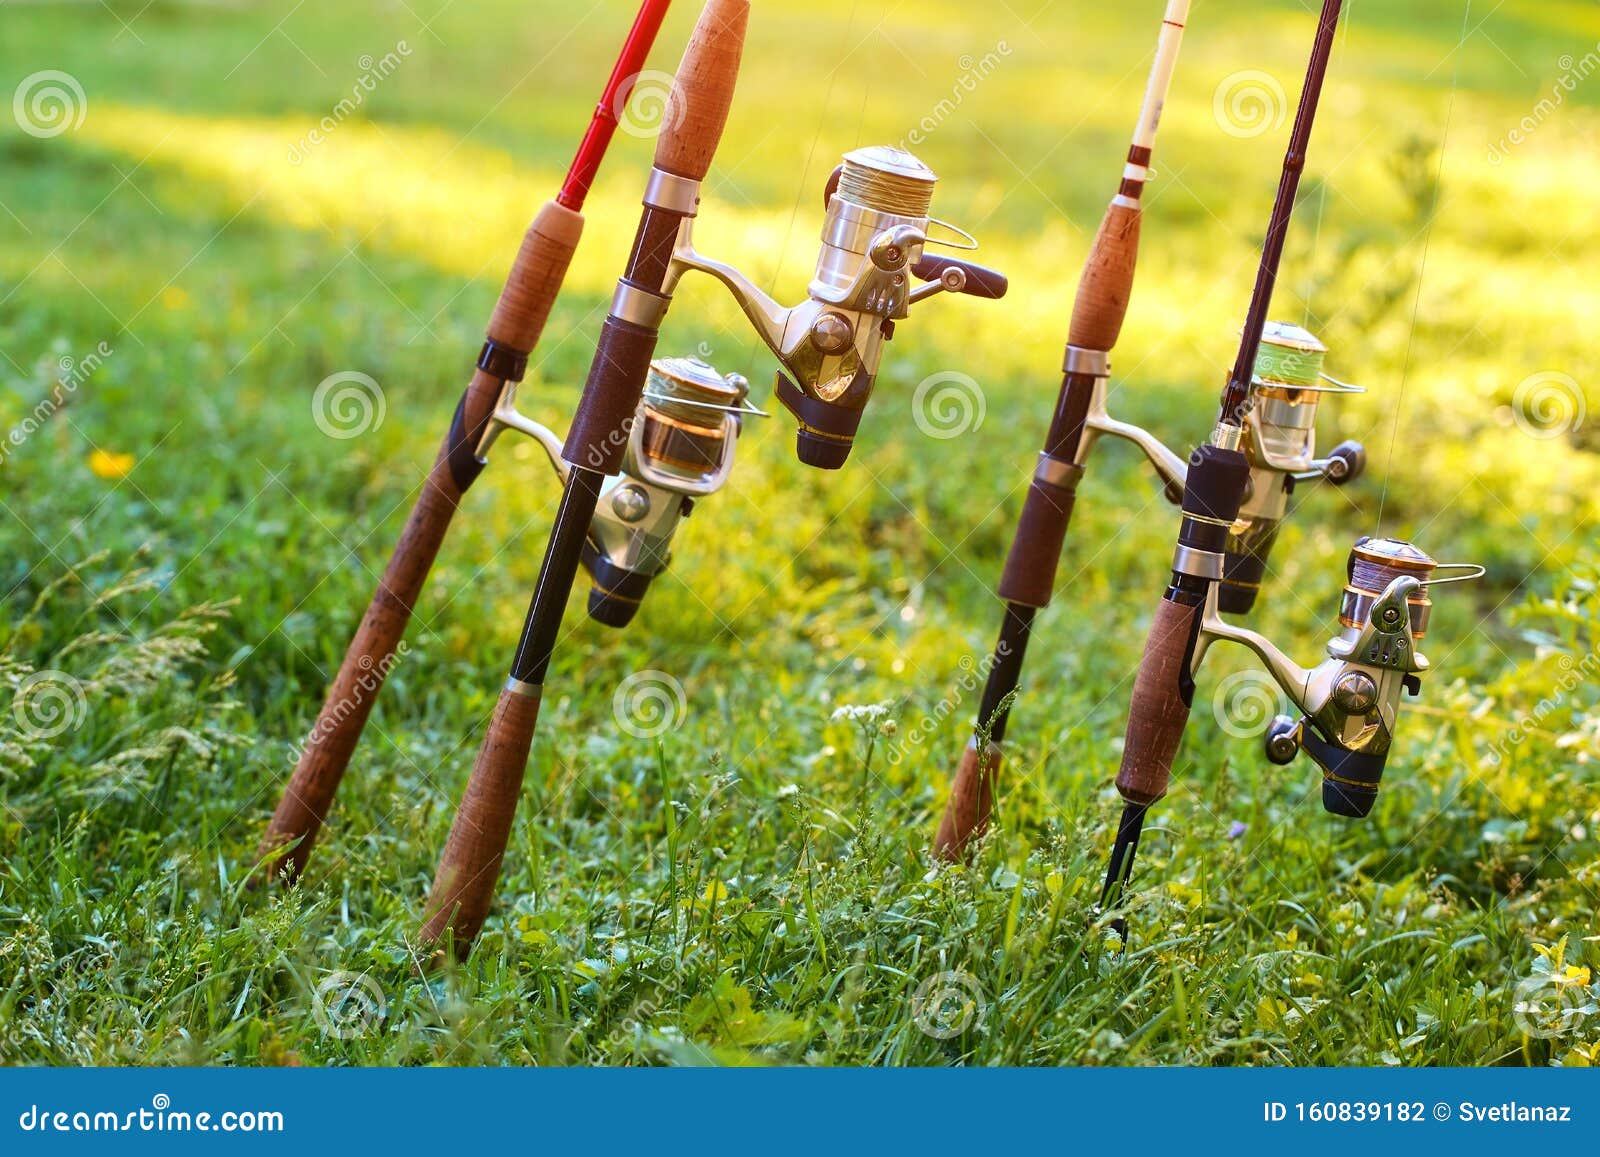 https://thumbs.dreamstime.com/z/various-fishing-rods-reels-background-green-grass-various-fishing-rods-reels-background-green-grass-160839182.jpg